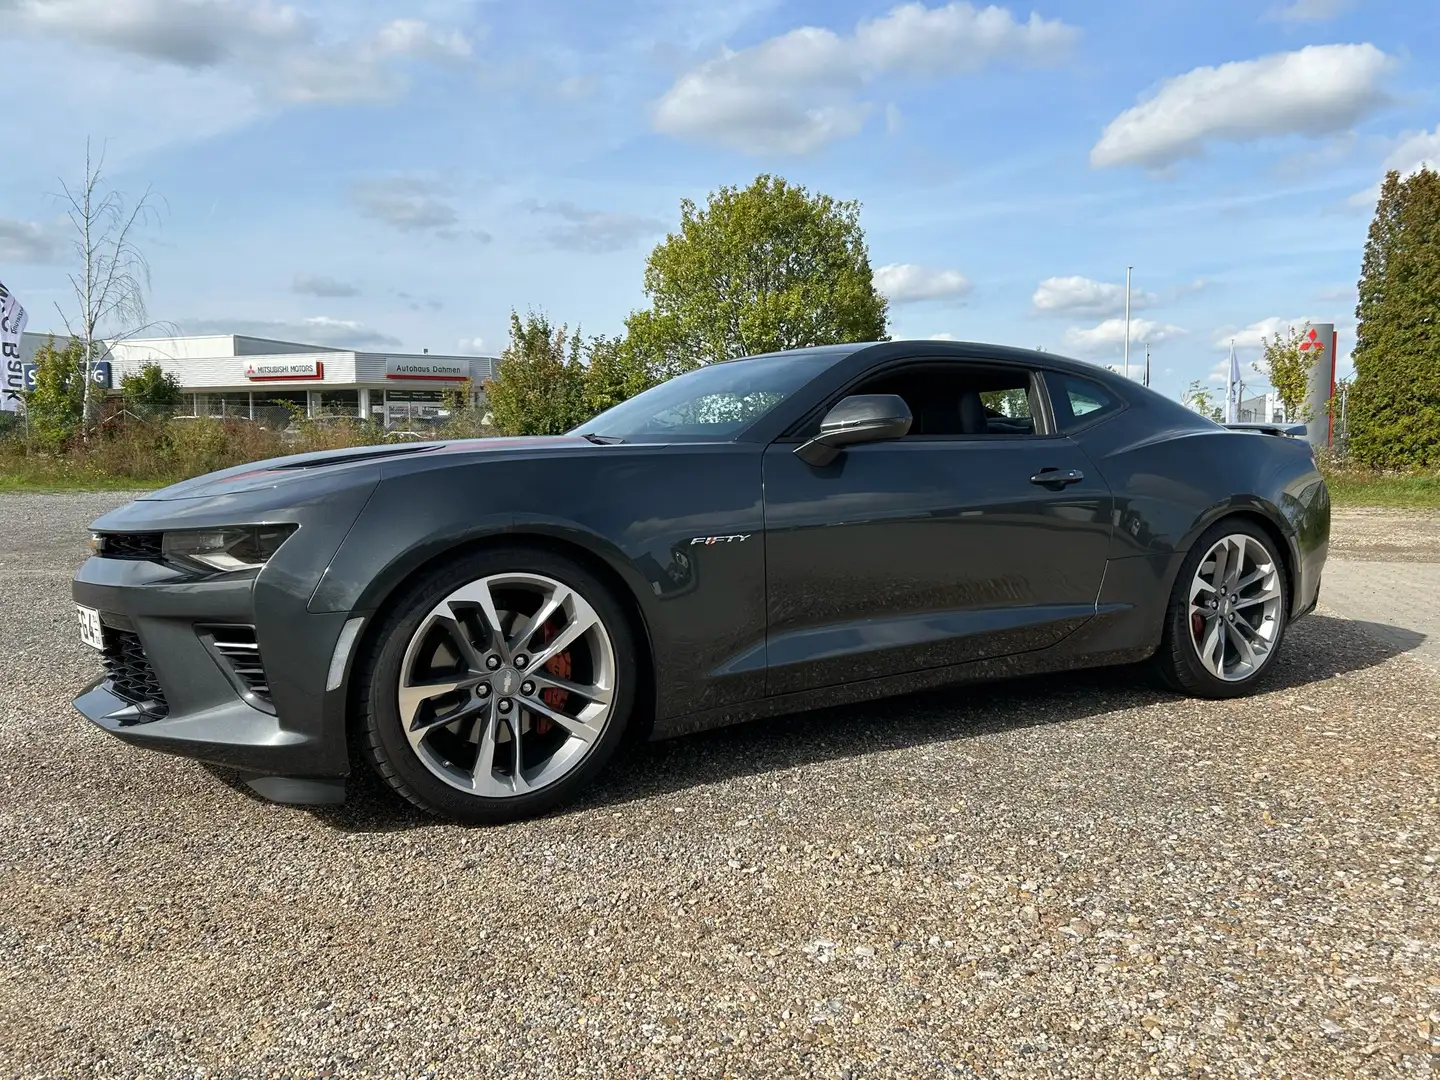 Chevrolet Camaro Coupe 6.2 V8 Fifty Limited Edition Grau - 1